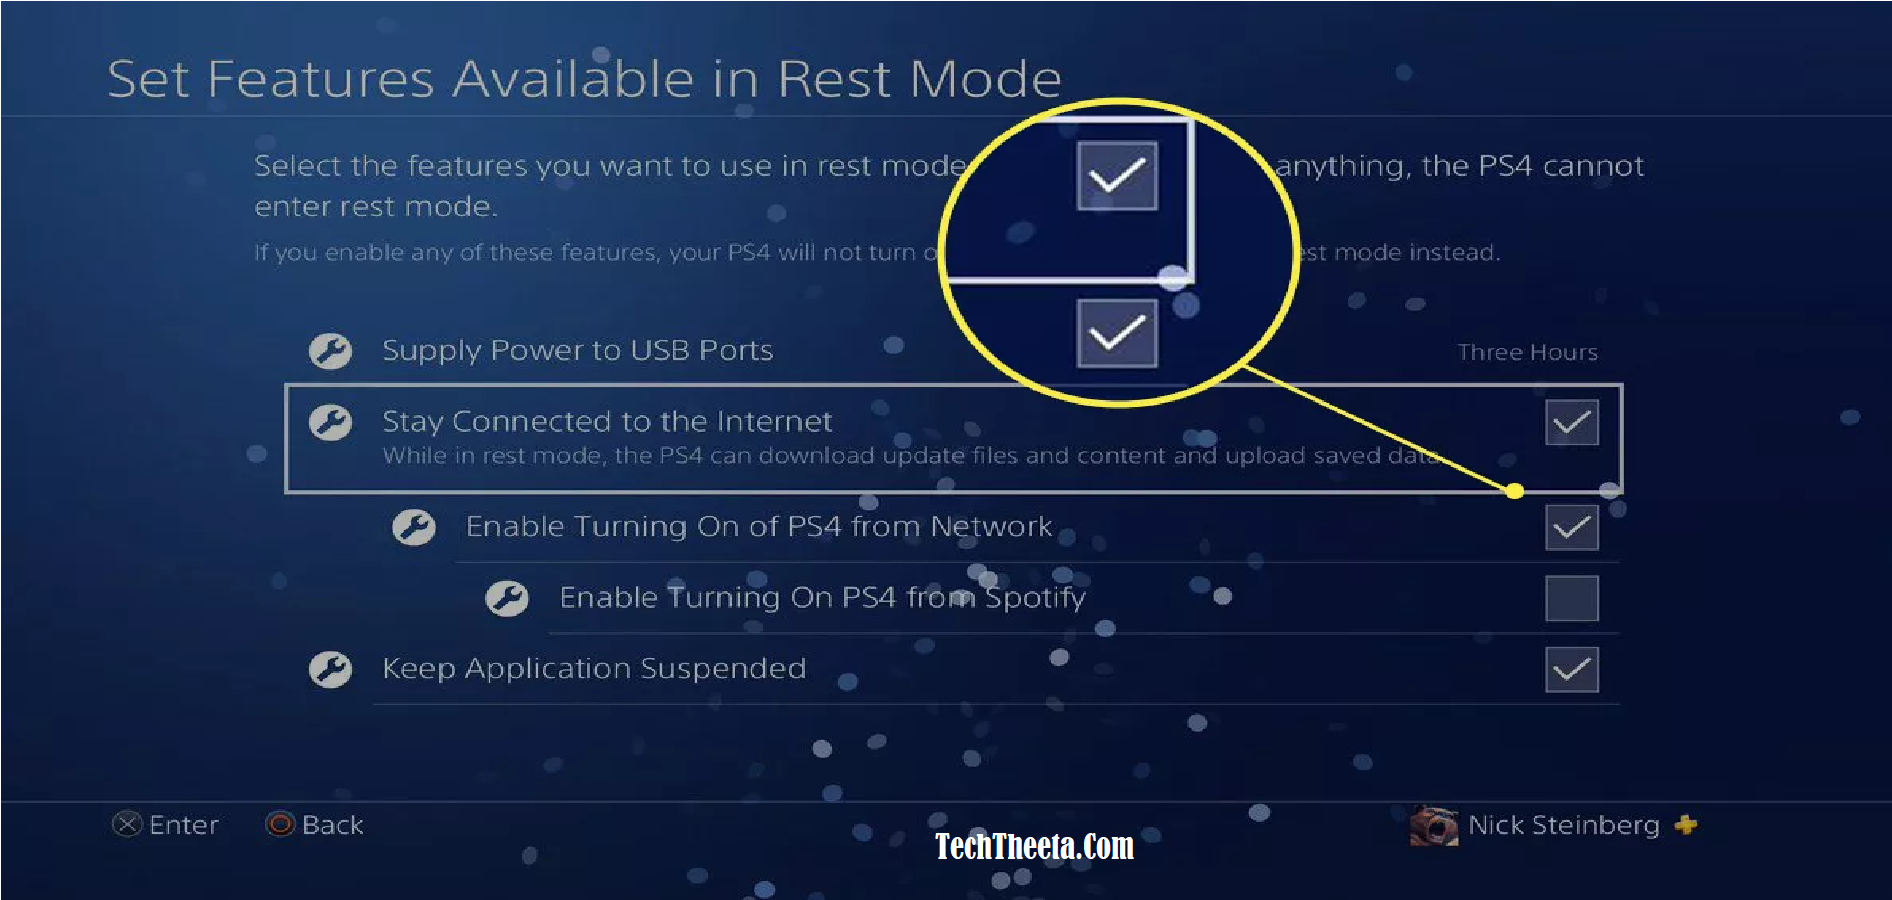 Stay Connected to the Internet and Enable Turning on PS4 from Network